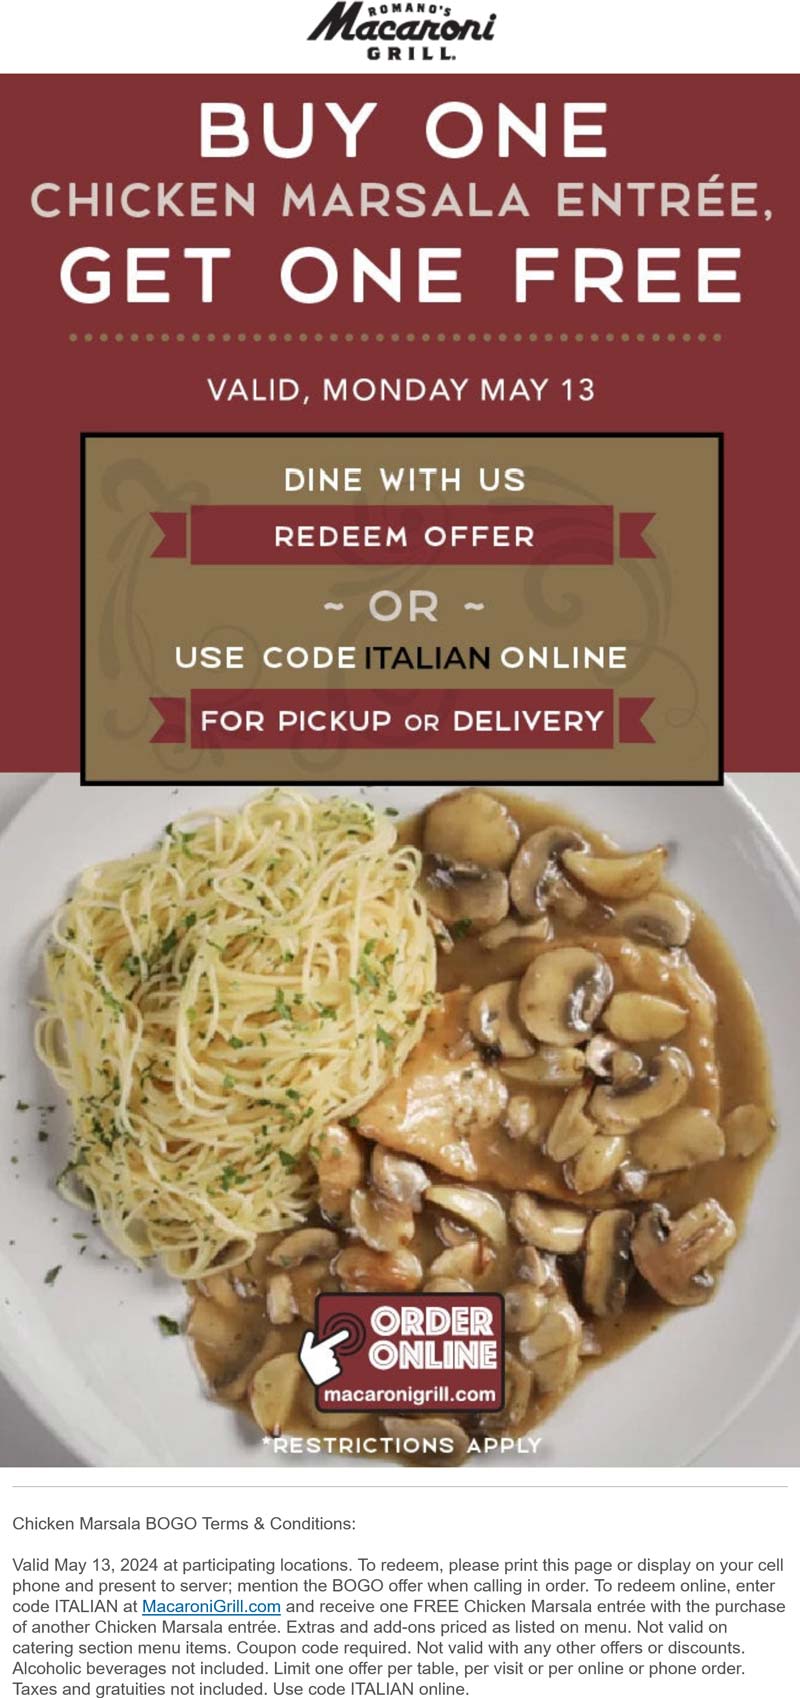 Macaroni Grill restaurants Coupon  Second chicken marsala entree free today at Macaroni Grill, or online via promo code BOGO #macaronigrill 